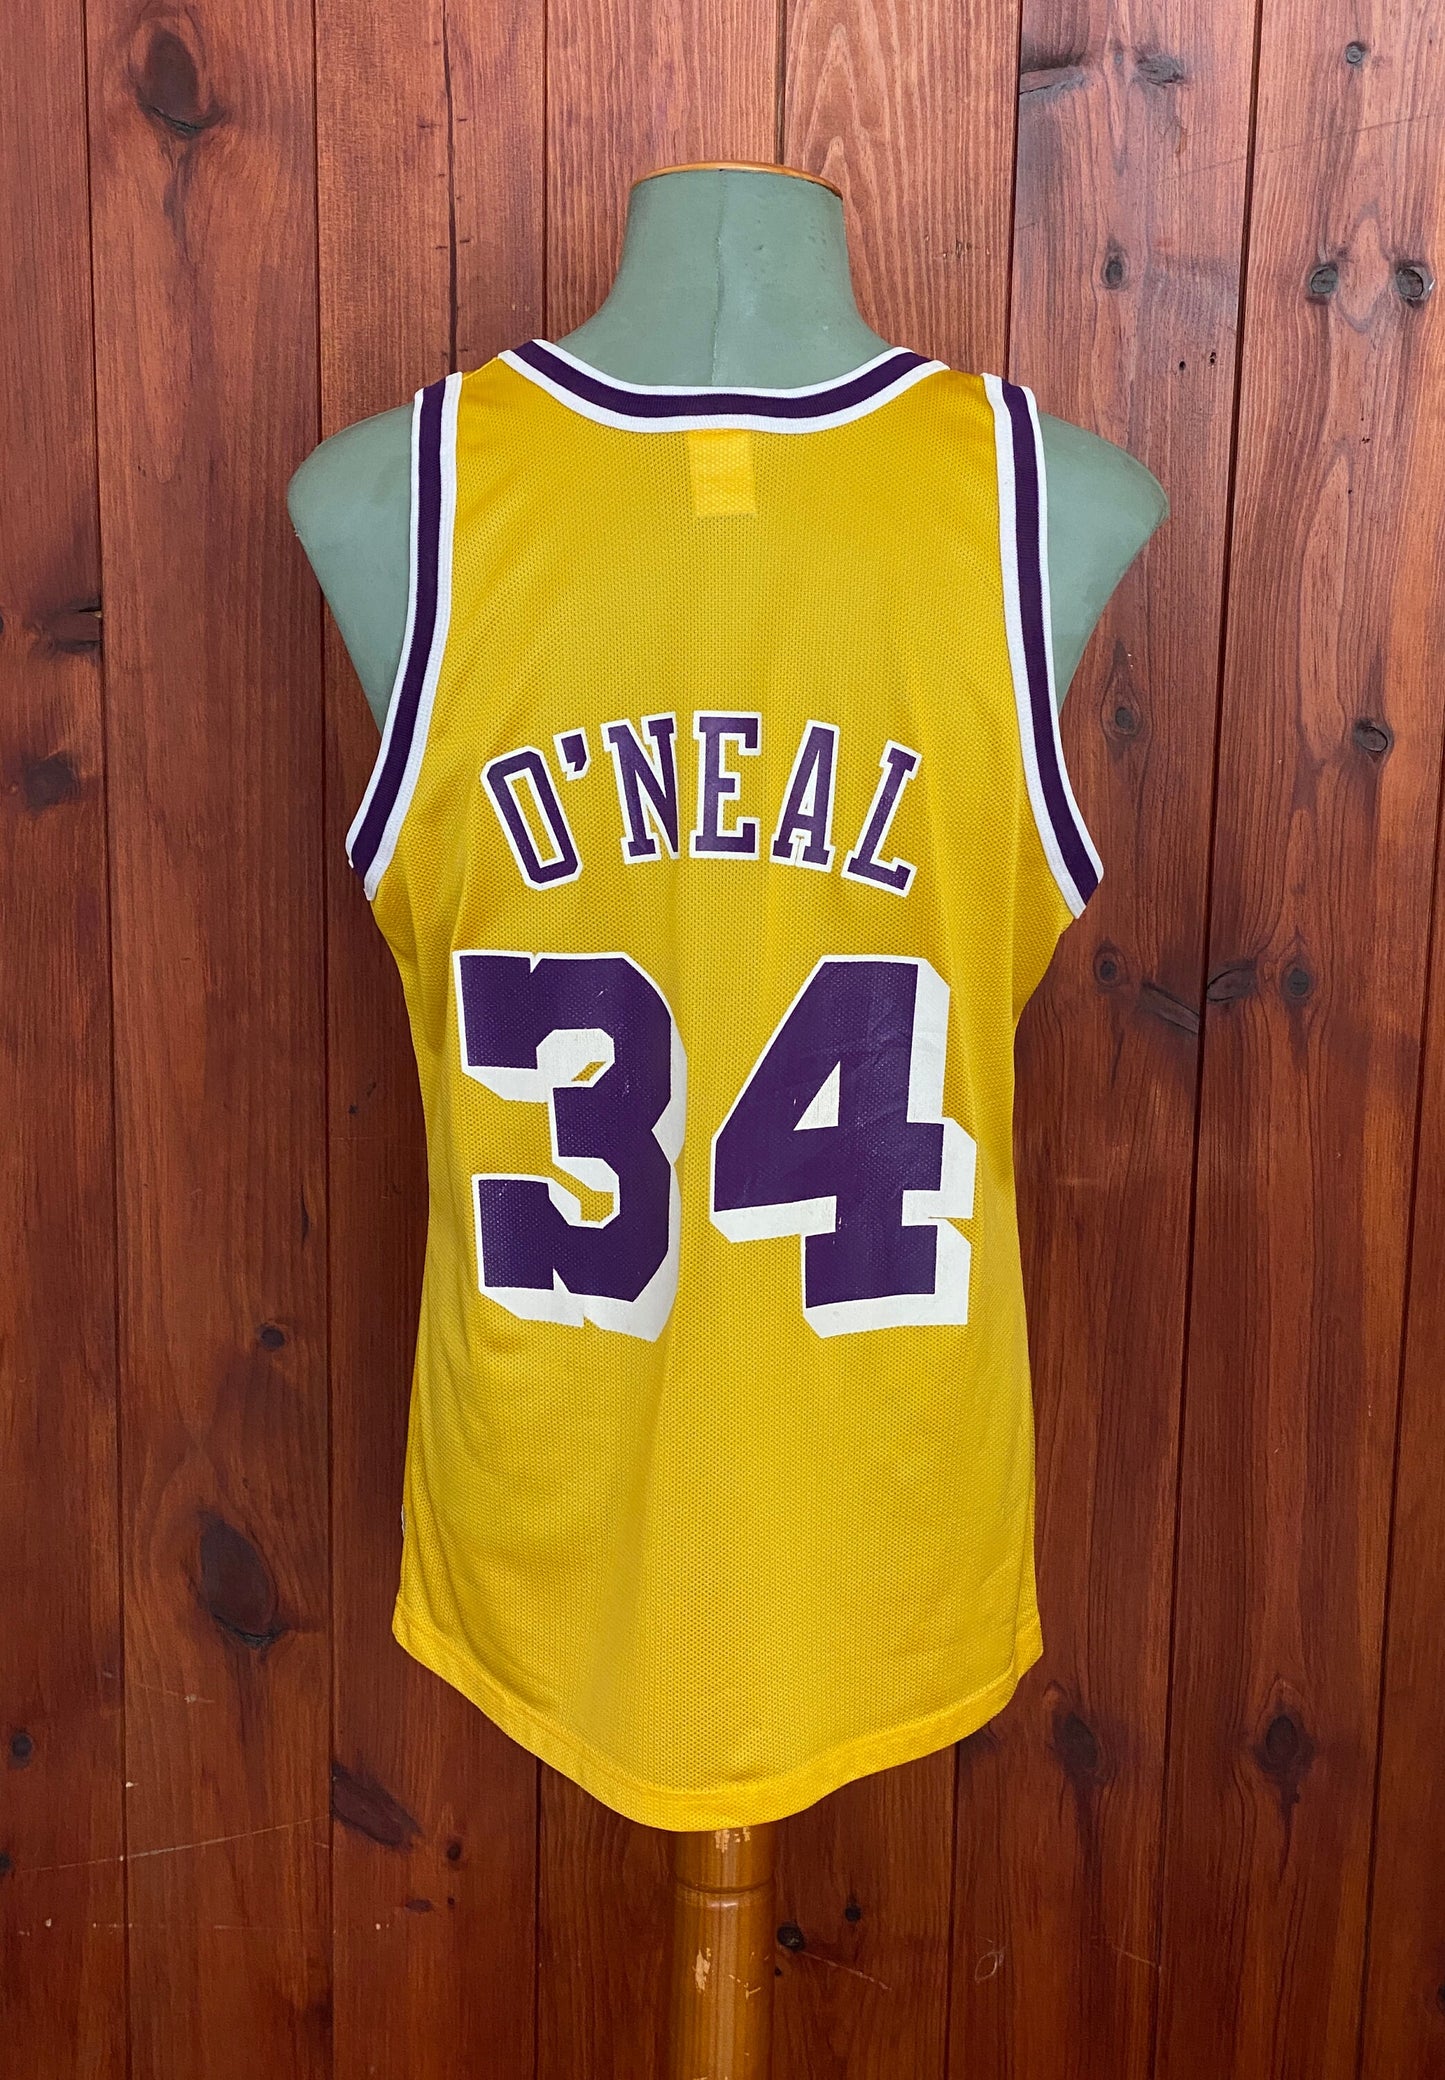 Vintage NBA Champion jersey LA Lakers with player O'Neal #34, size 44 - back view.